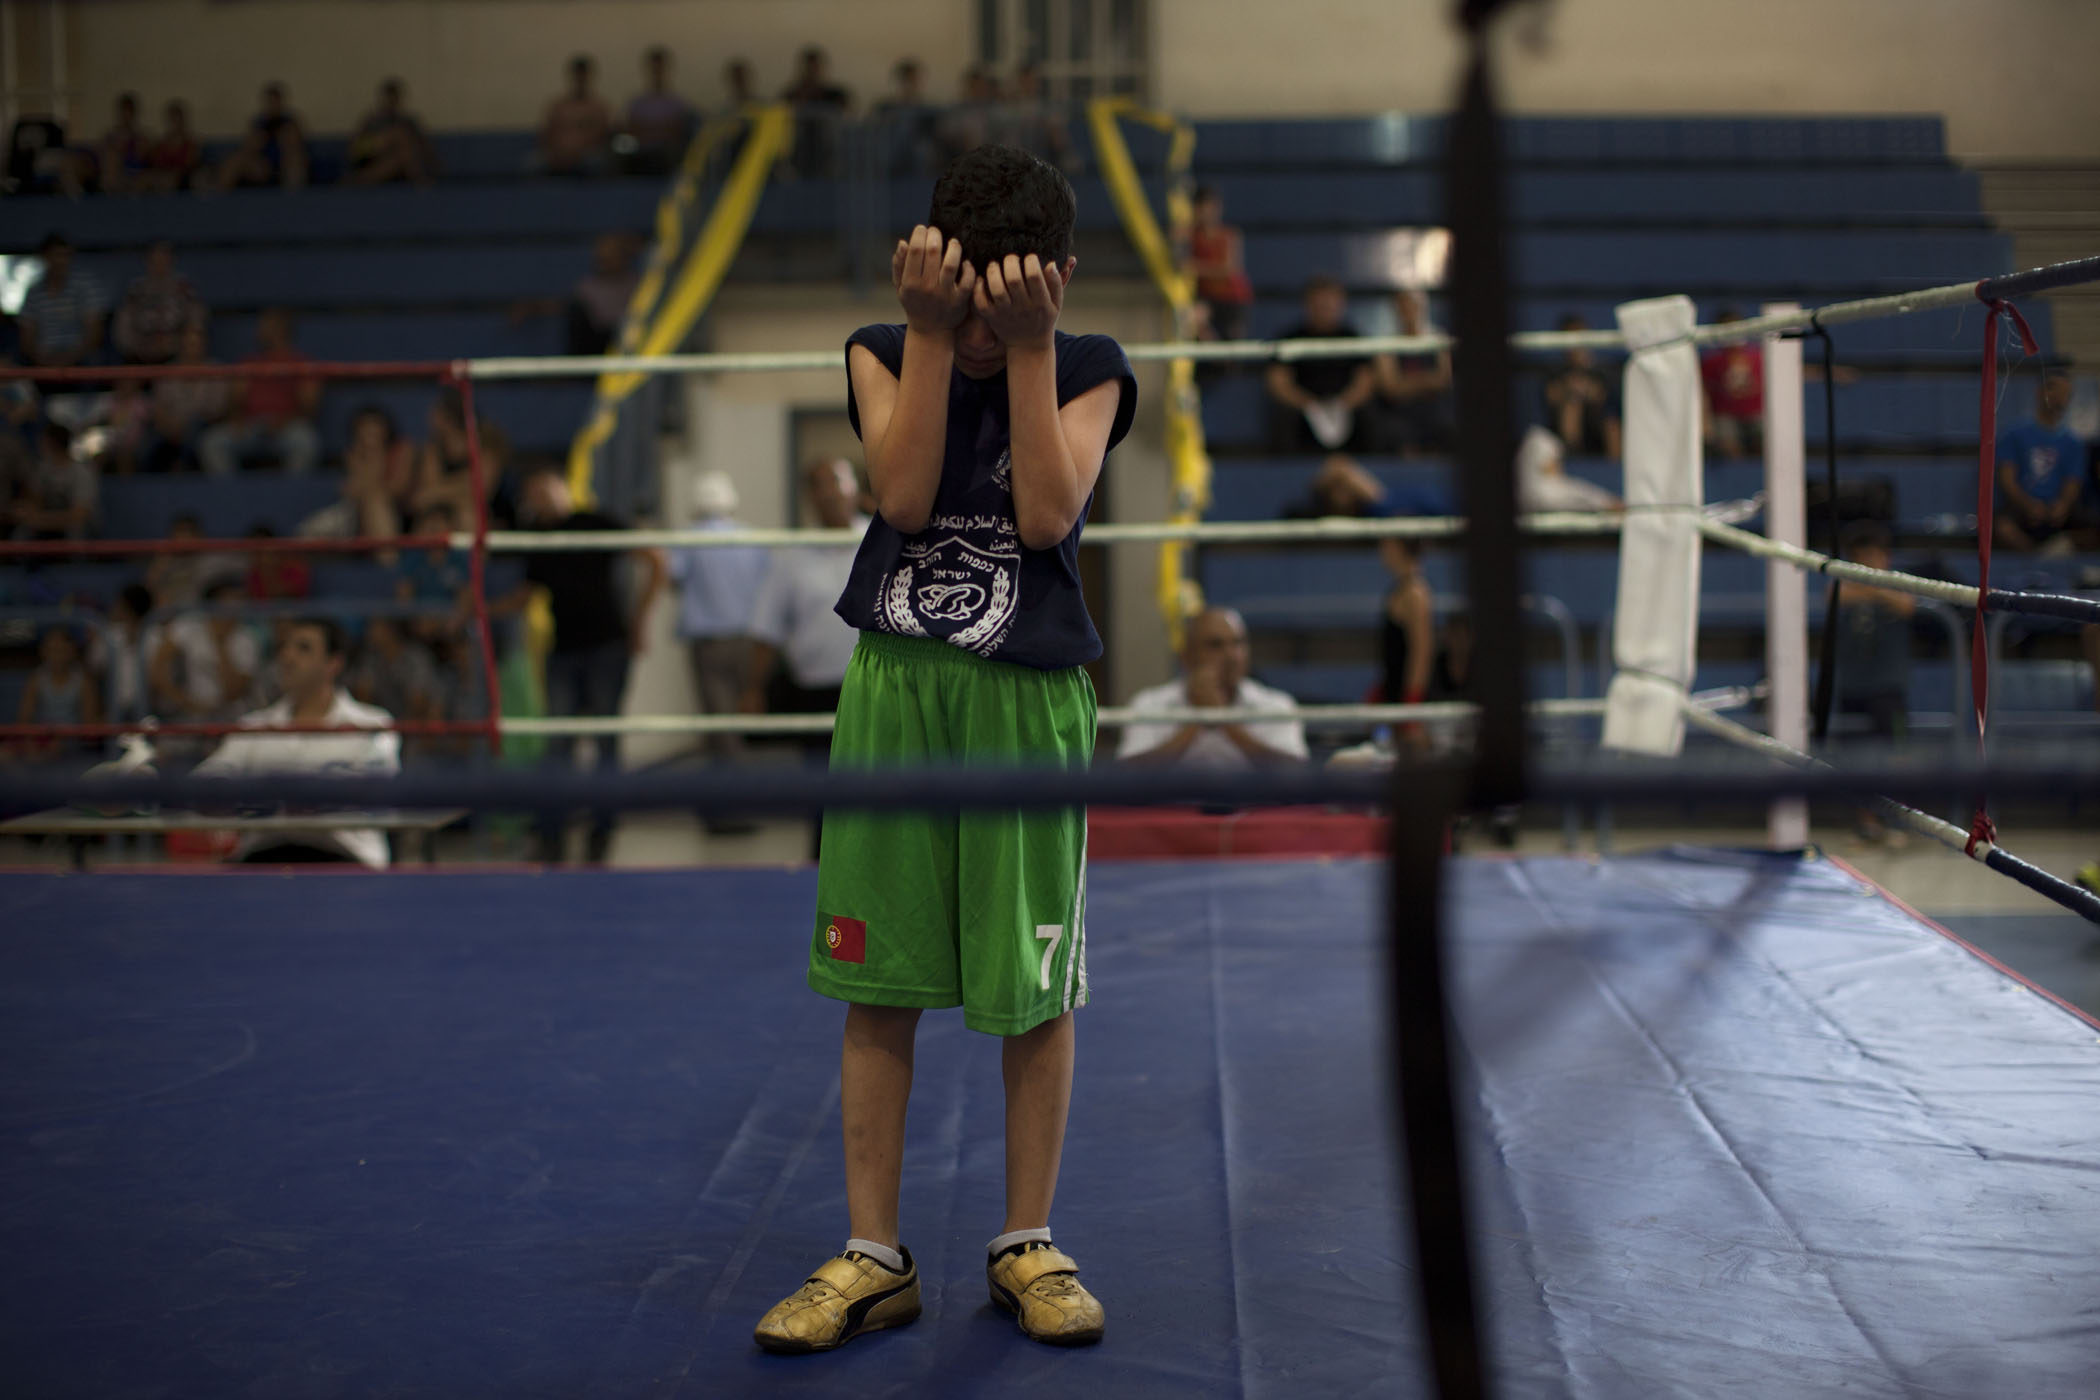 A young Israeli Arab boxer cries after losing a fight during Israel's National Youth Boxing Championship in the Arab village of Arabe, northern Israel.